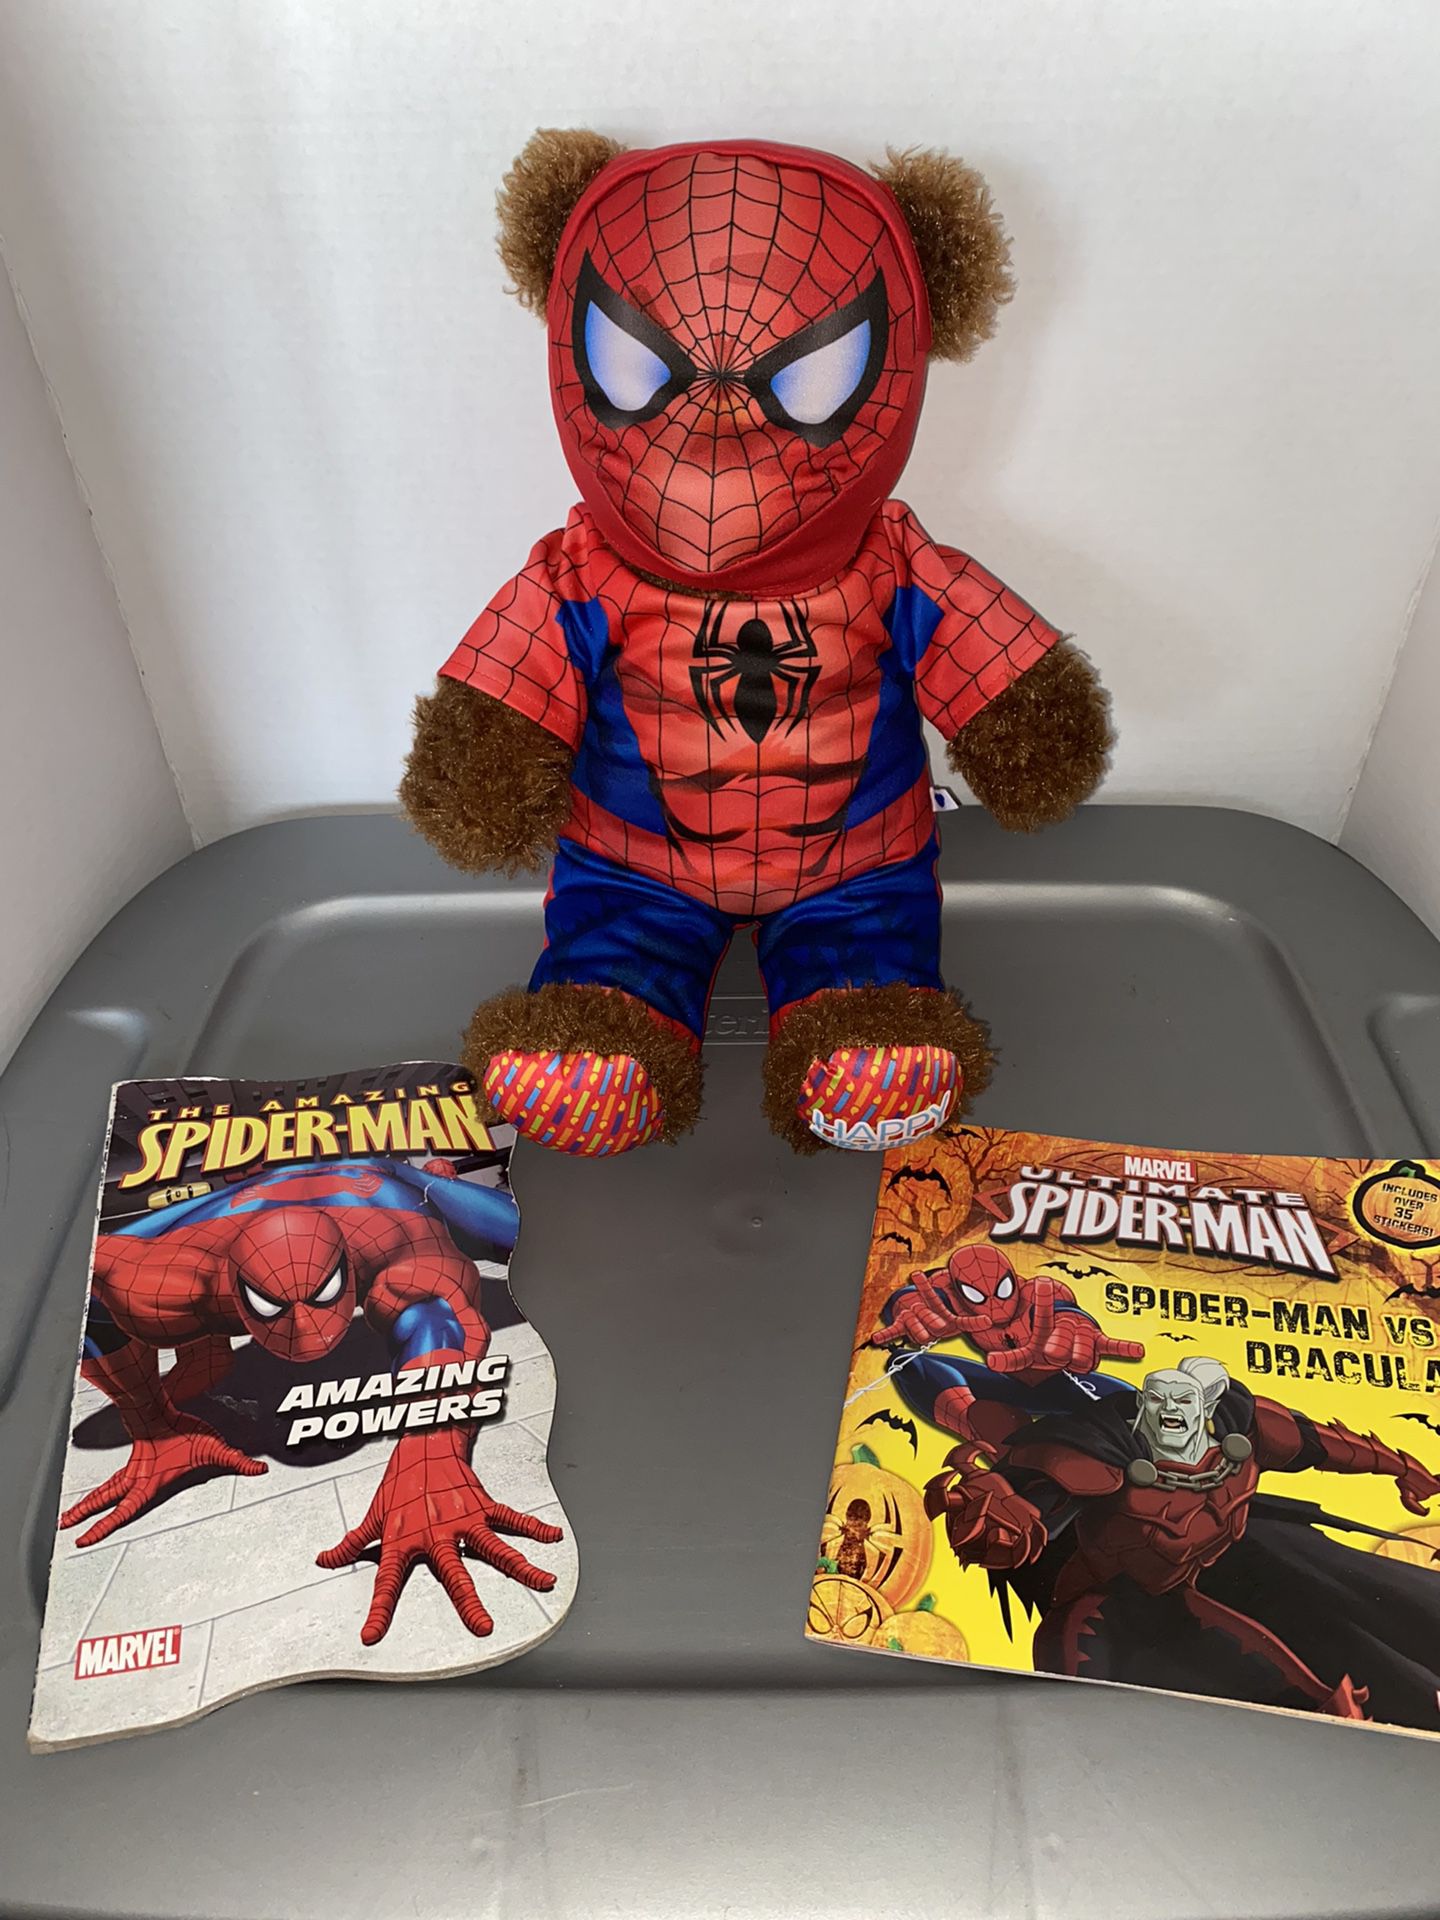 BAB As Spider-Man With Books 